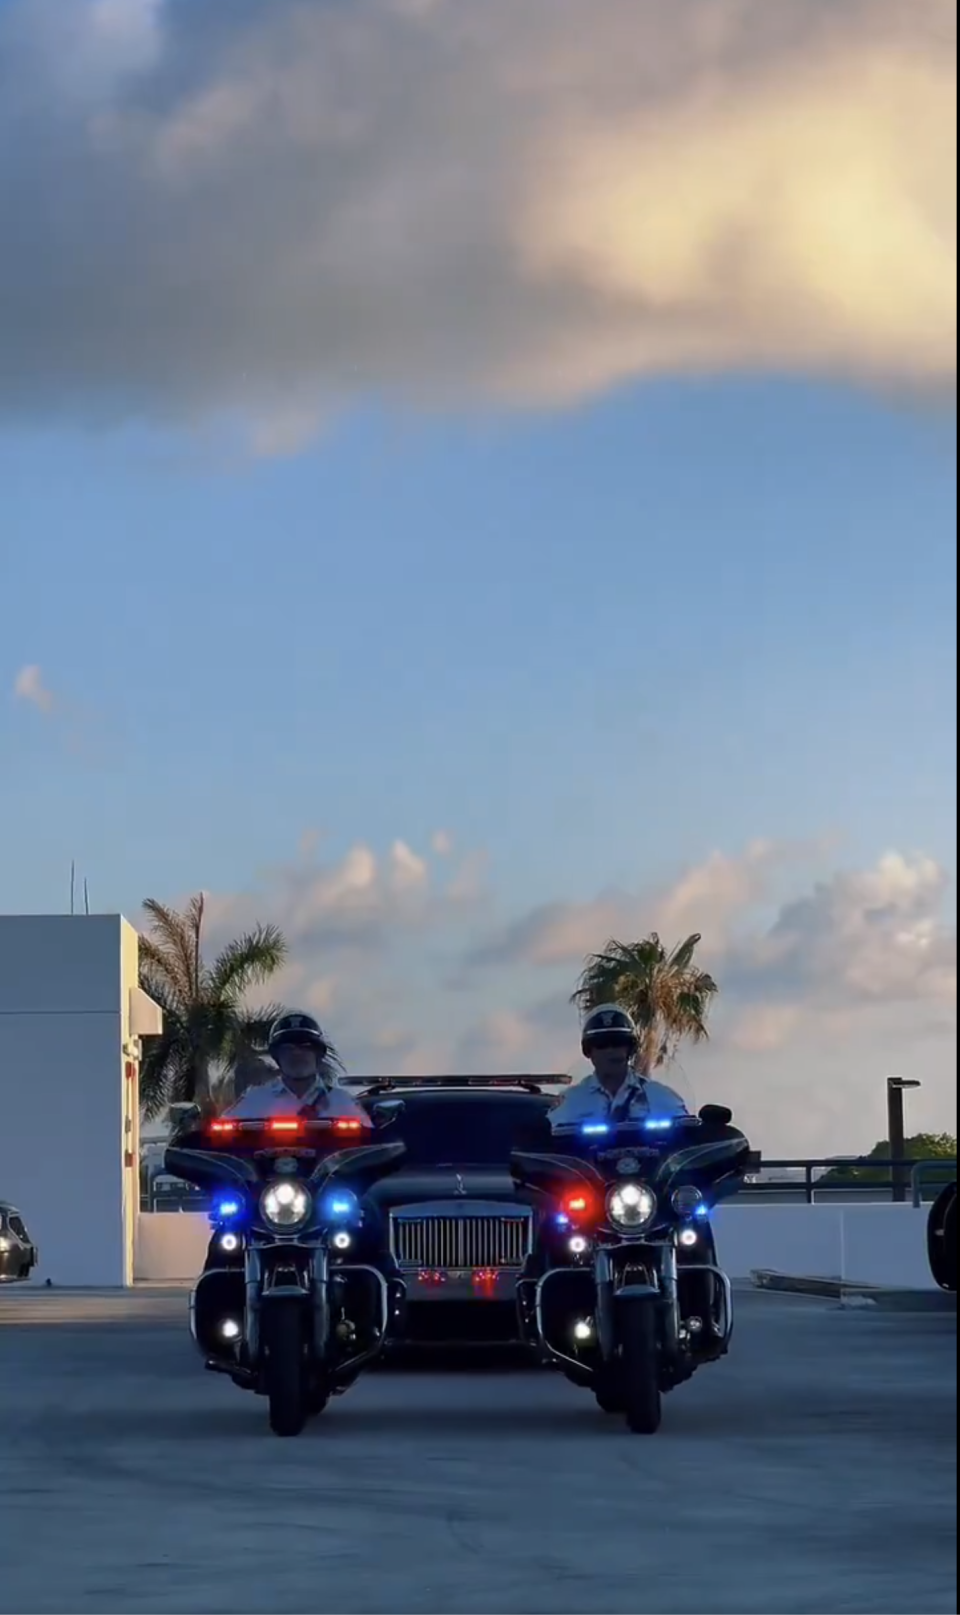 Two police officers ride motorcycles with flashing lights, leading a black car on a rooftop against a backdrop of palm trees and clouds